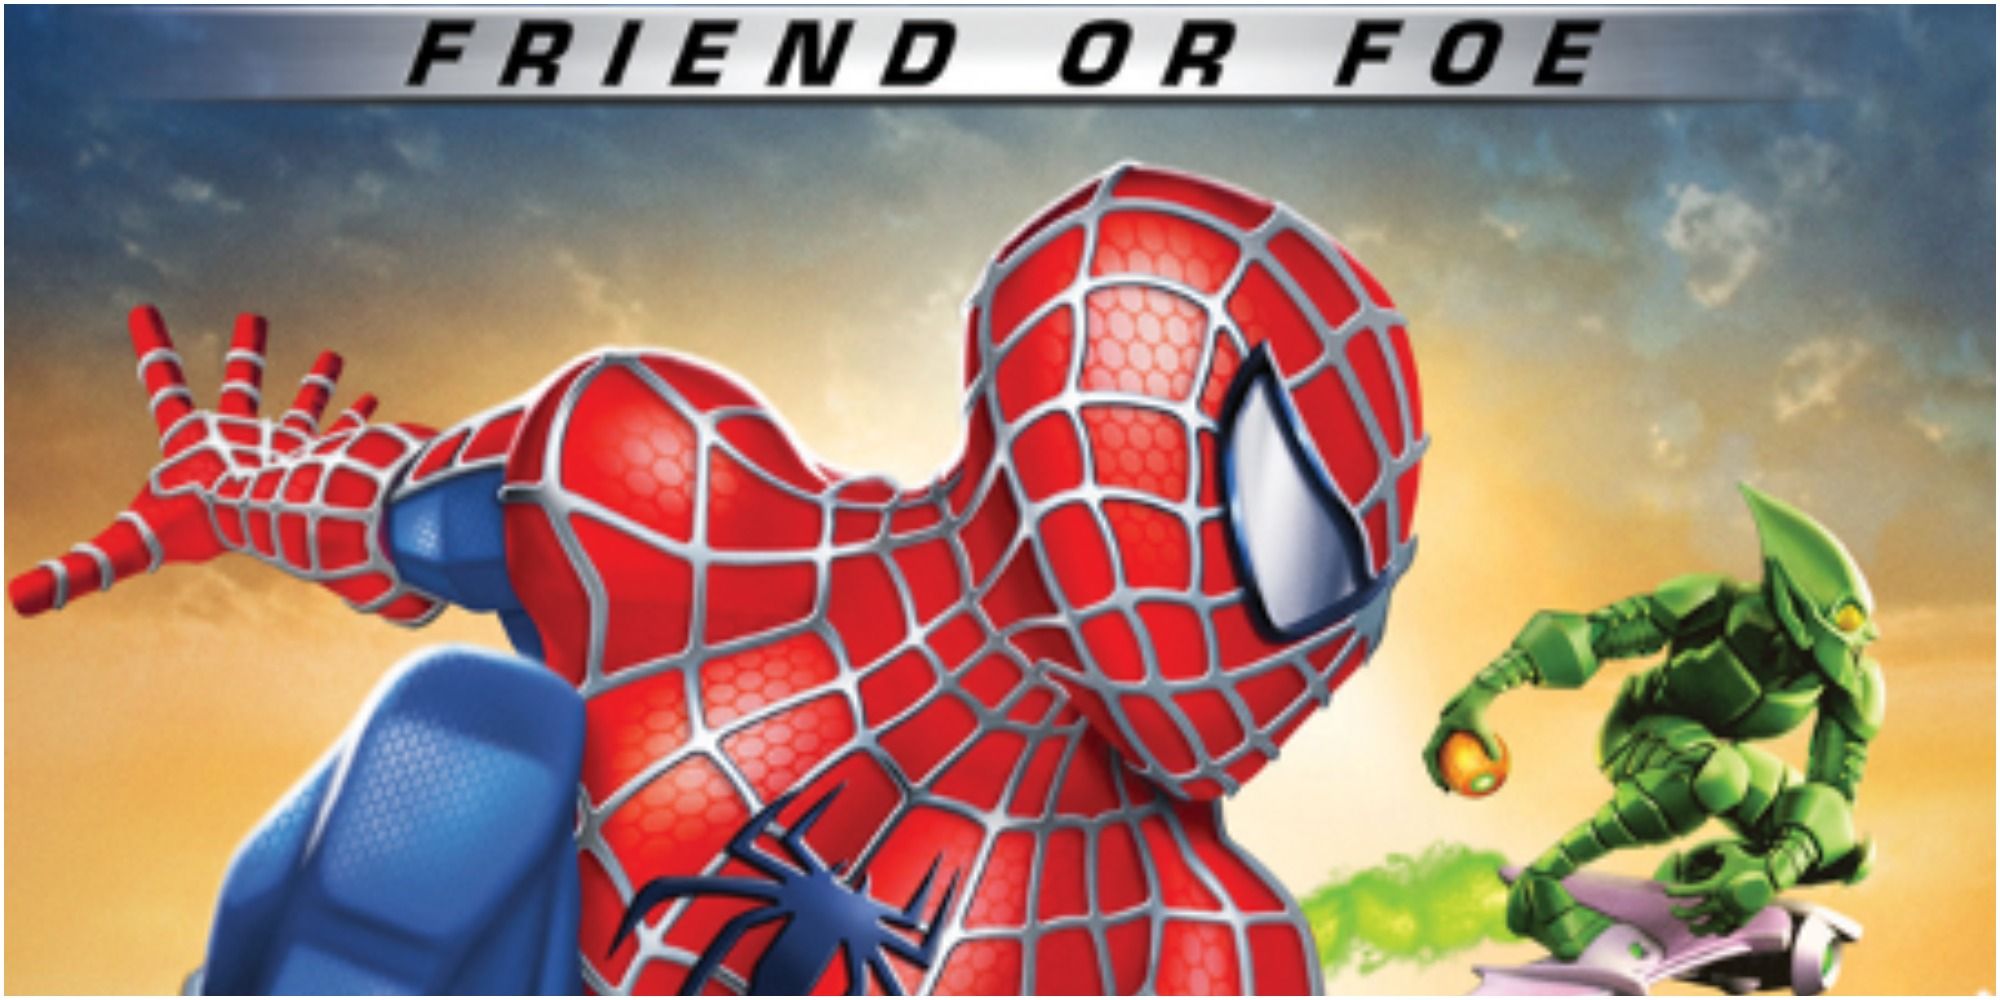 Spider-Man and the Green Goblin on the cover of Spider-Man Friend or Foe